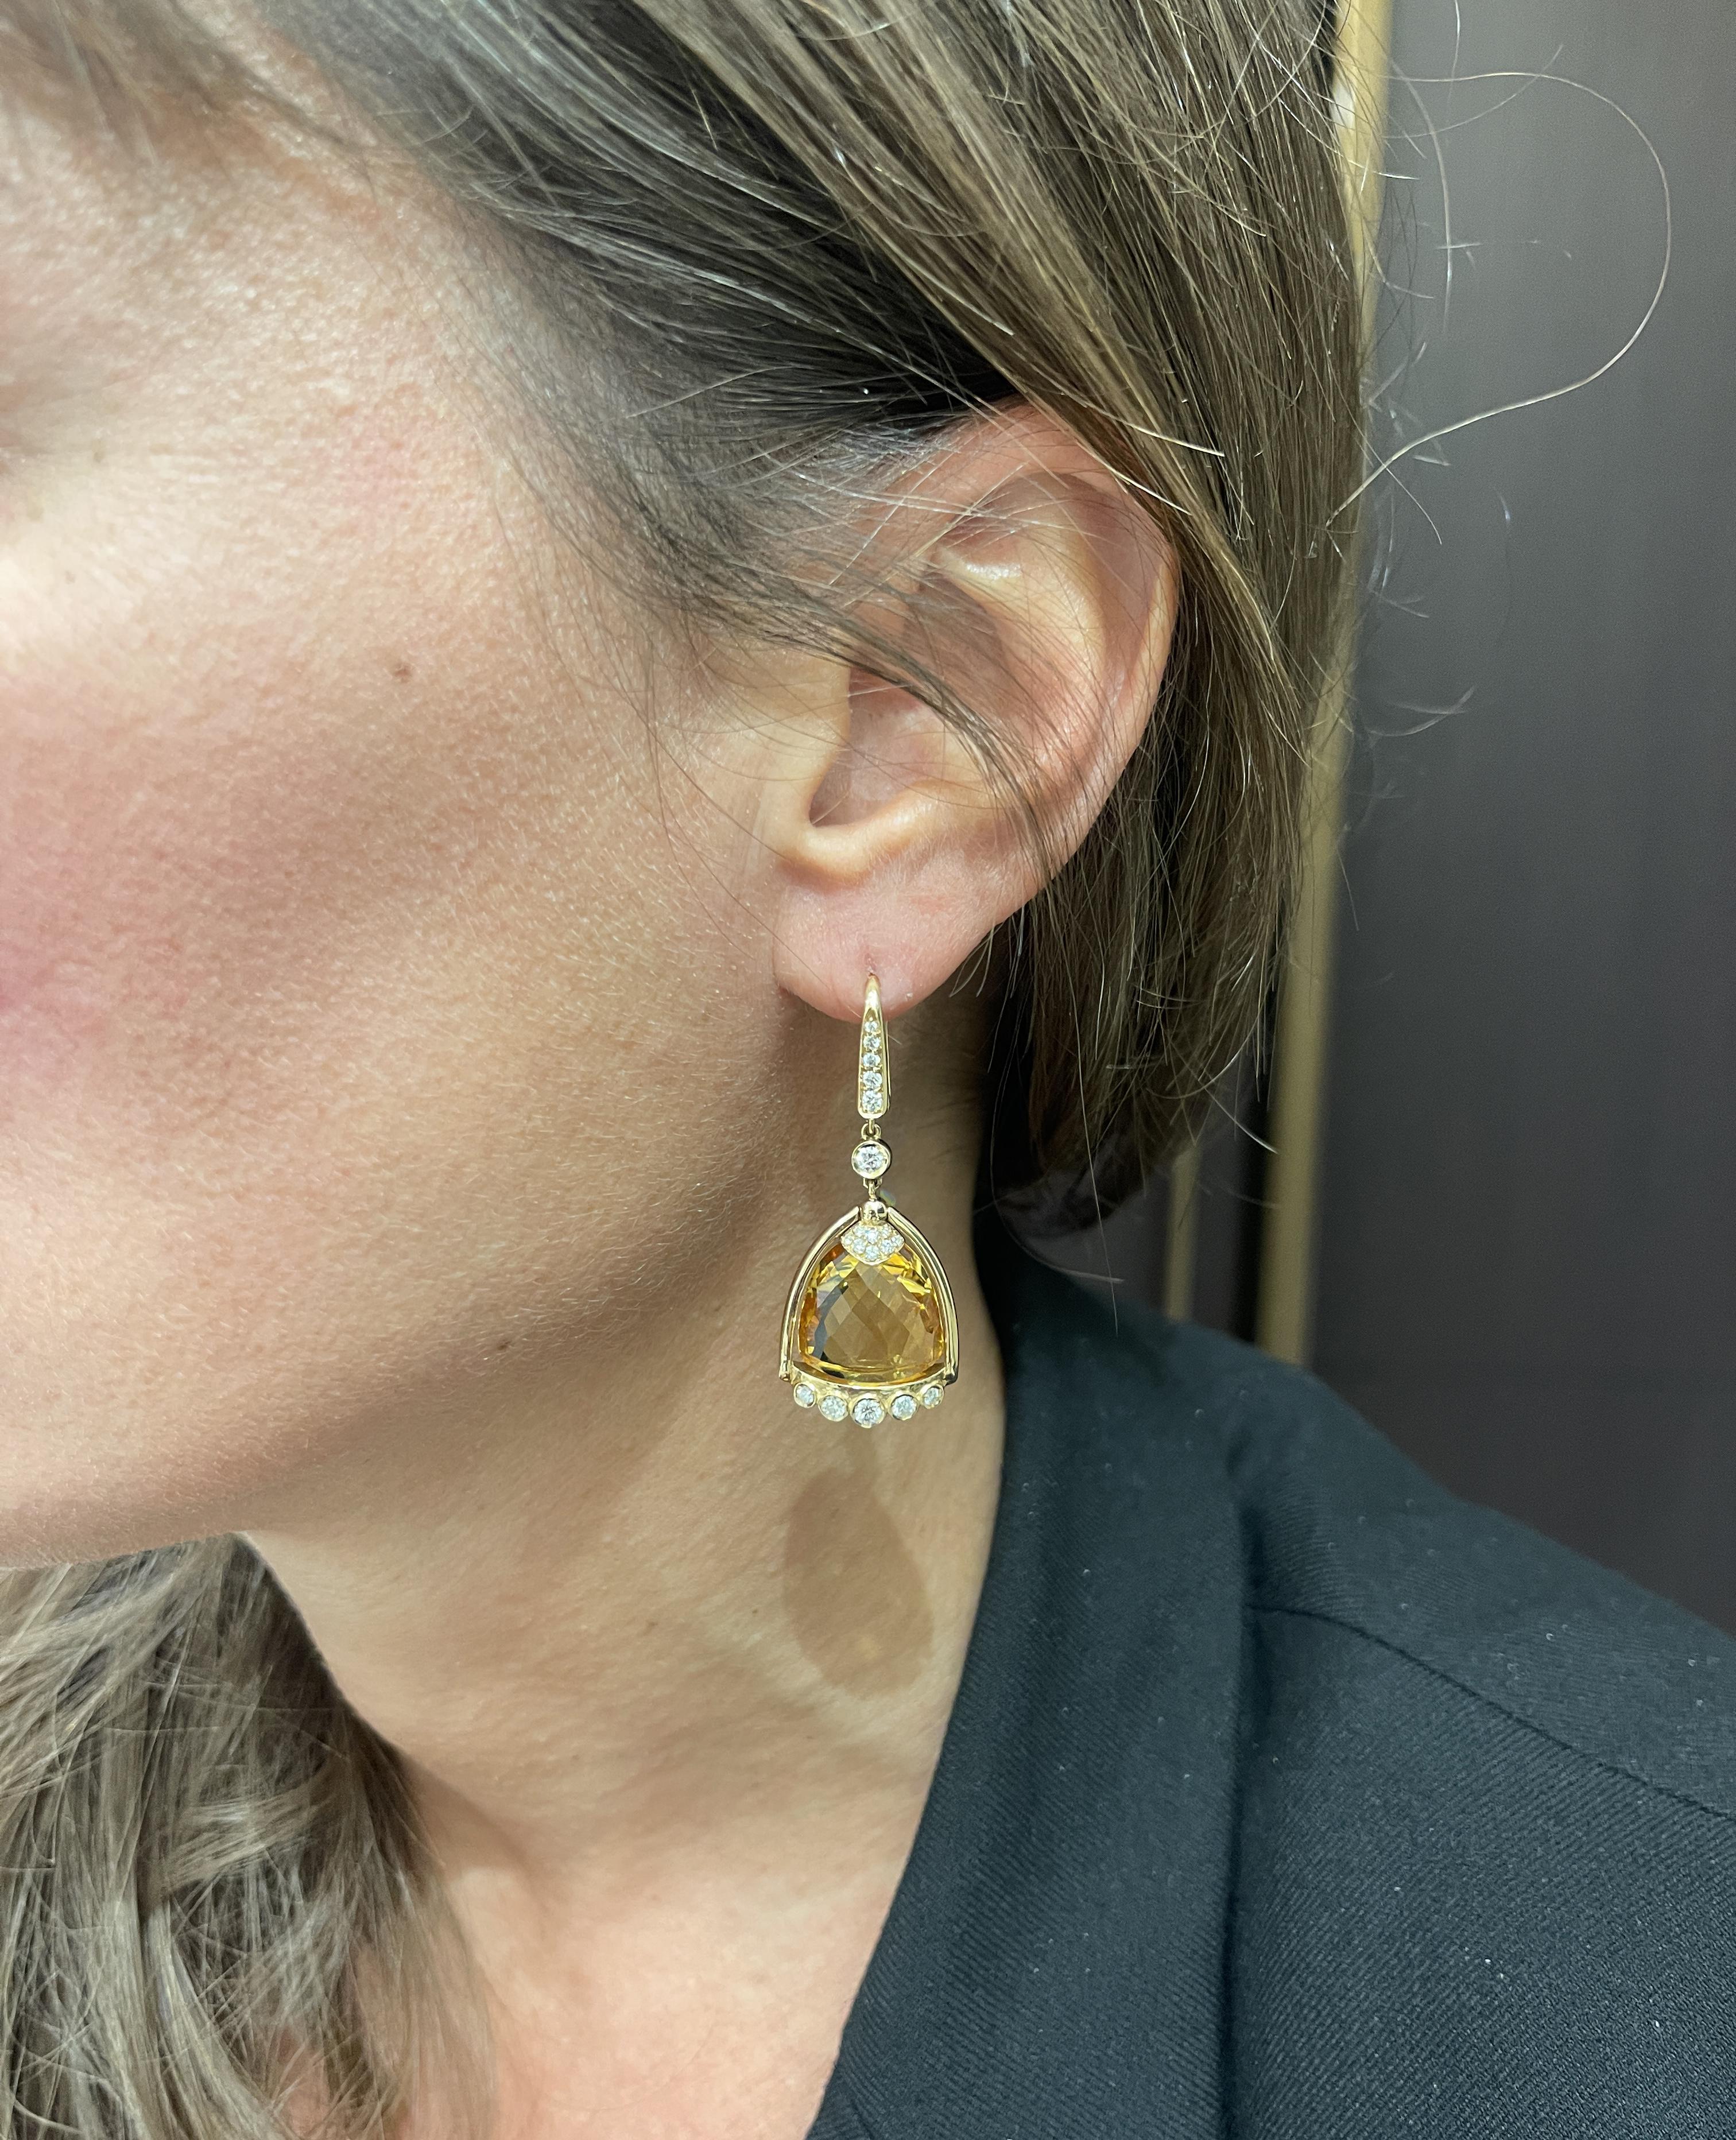 Bell Collection by Angeletti, Gold Earrings with Citrine and Diamonds.
The 